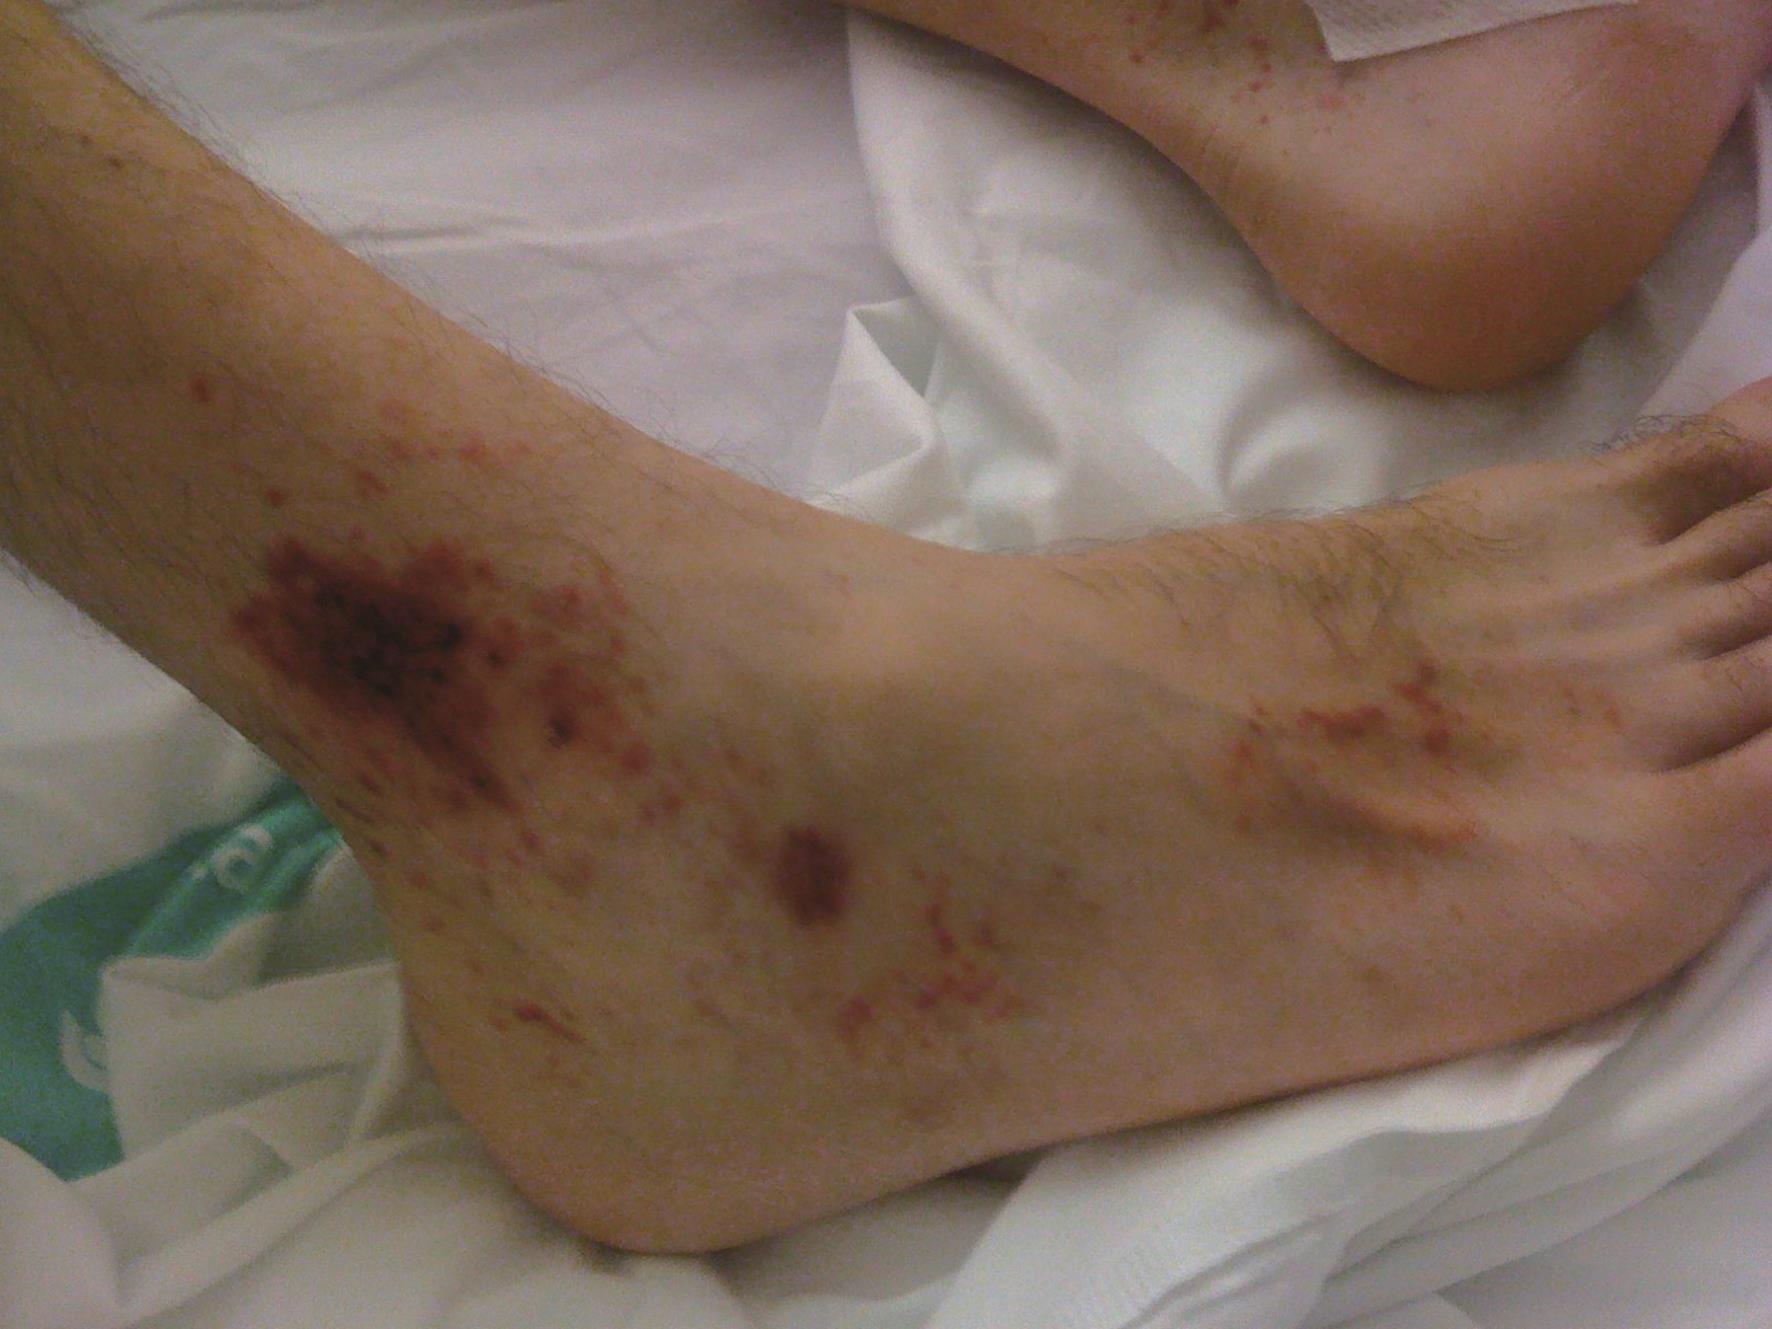 Leukocytoclastic vasculitis in the external area of the distal third of the right leg and foot.